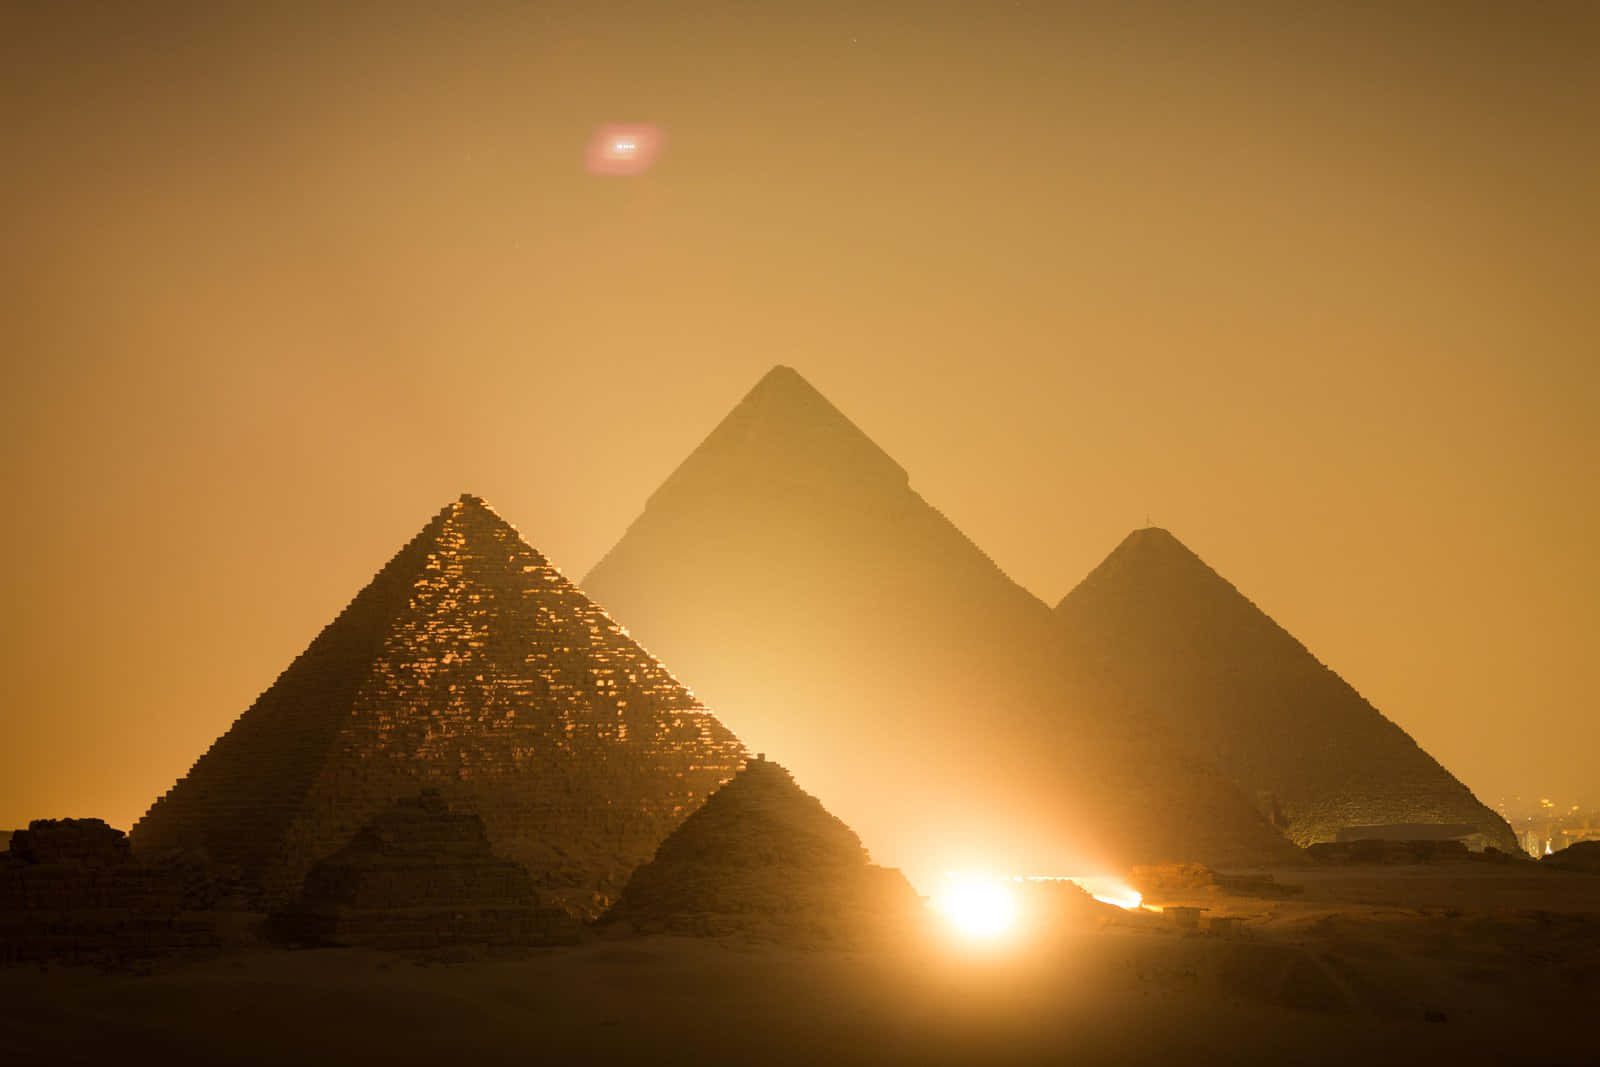 The Great Sphinx and Pyramids of Giza under a stunning sunset